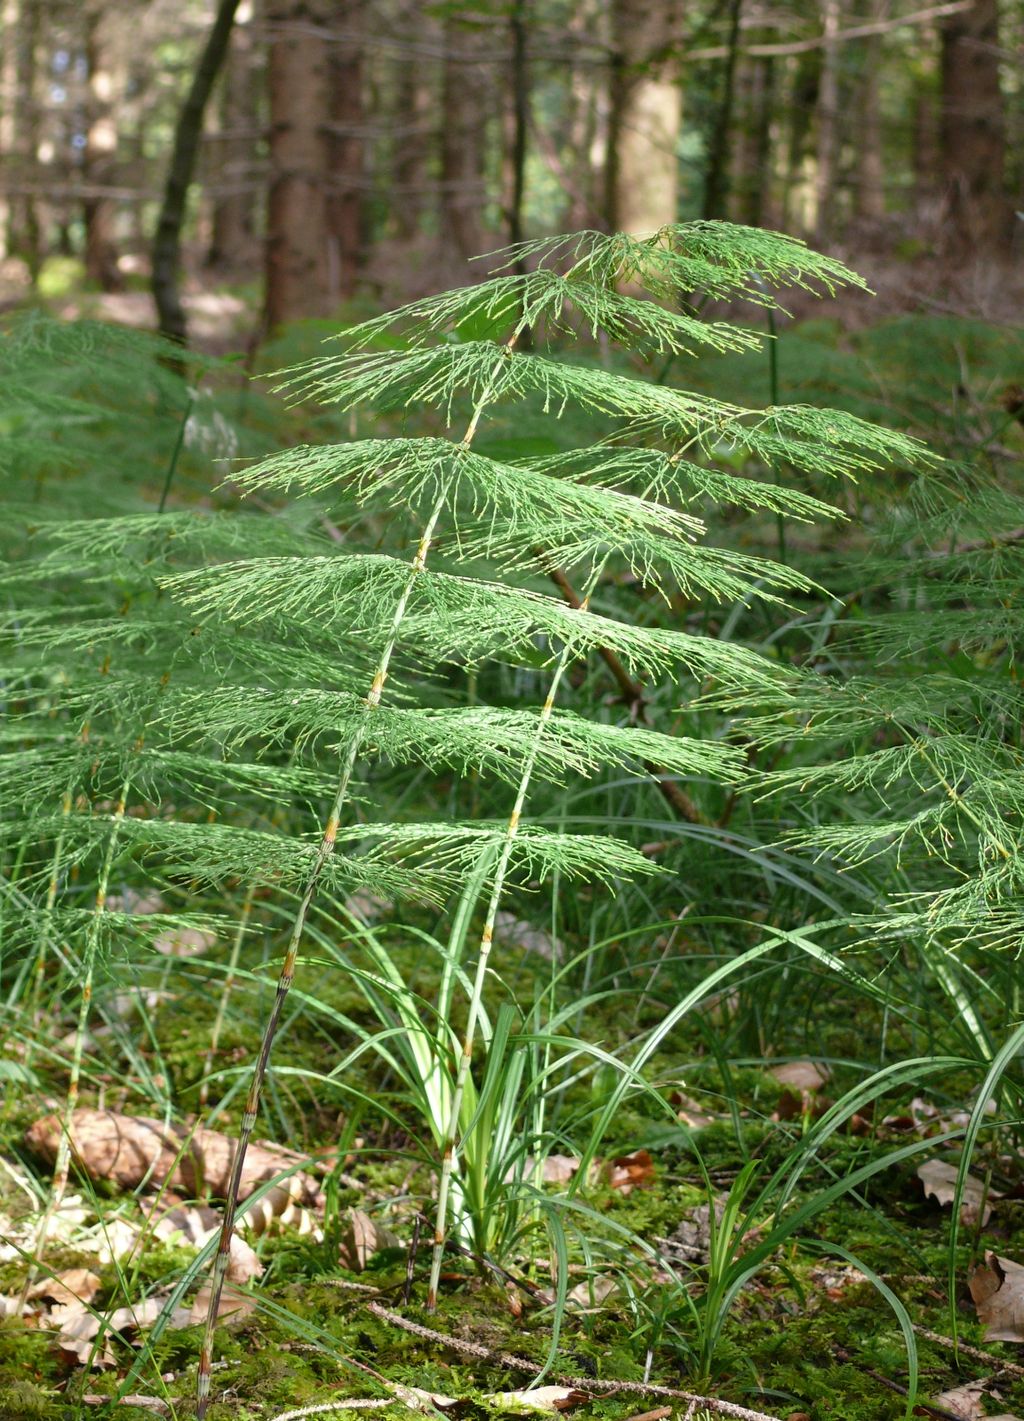 Horsetails in the wild